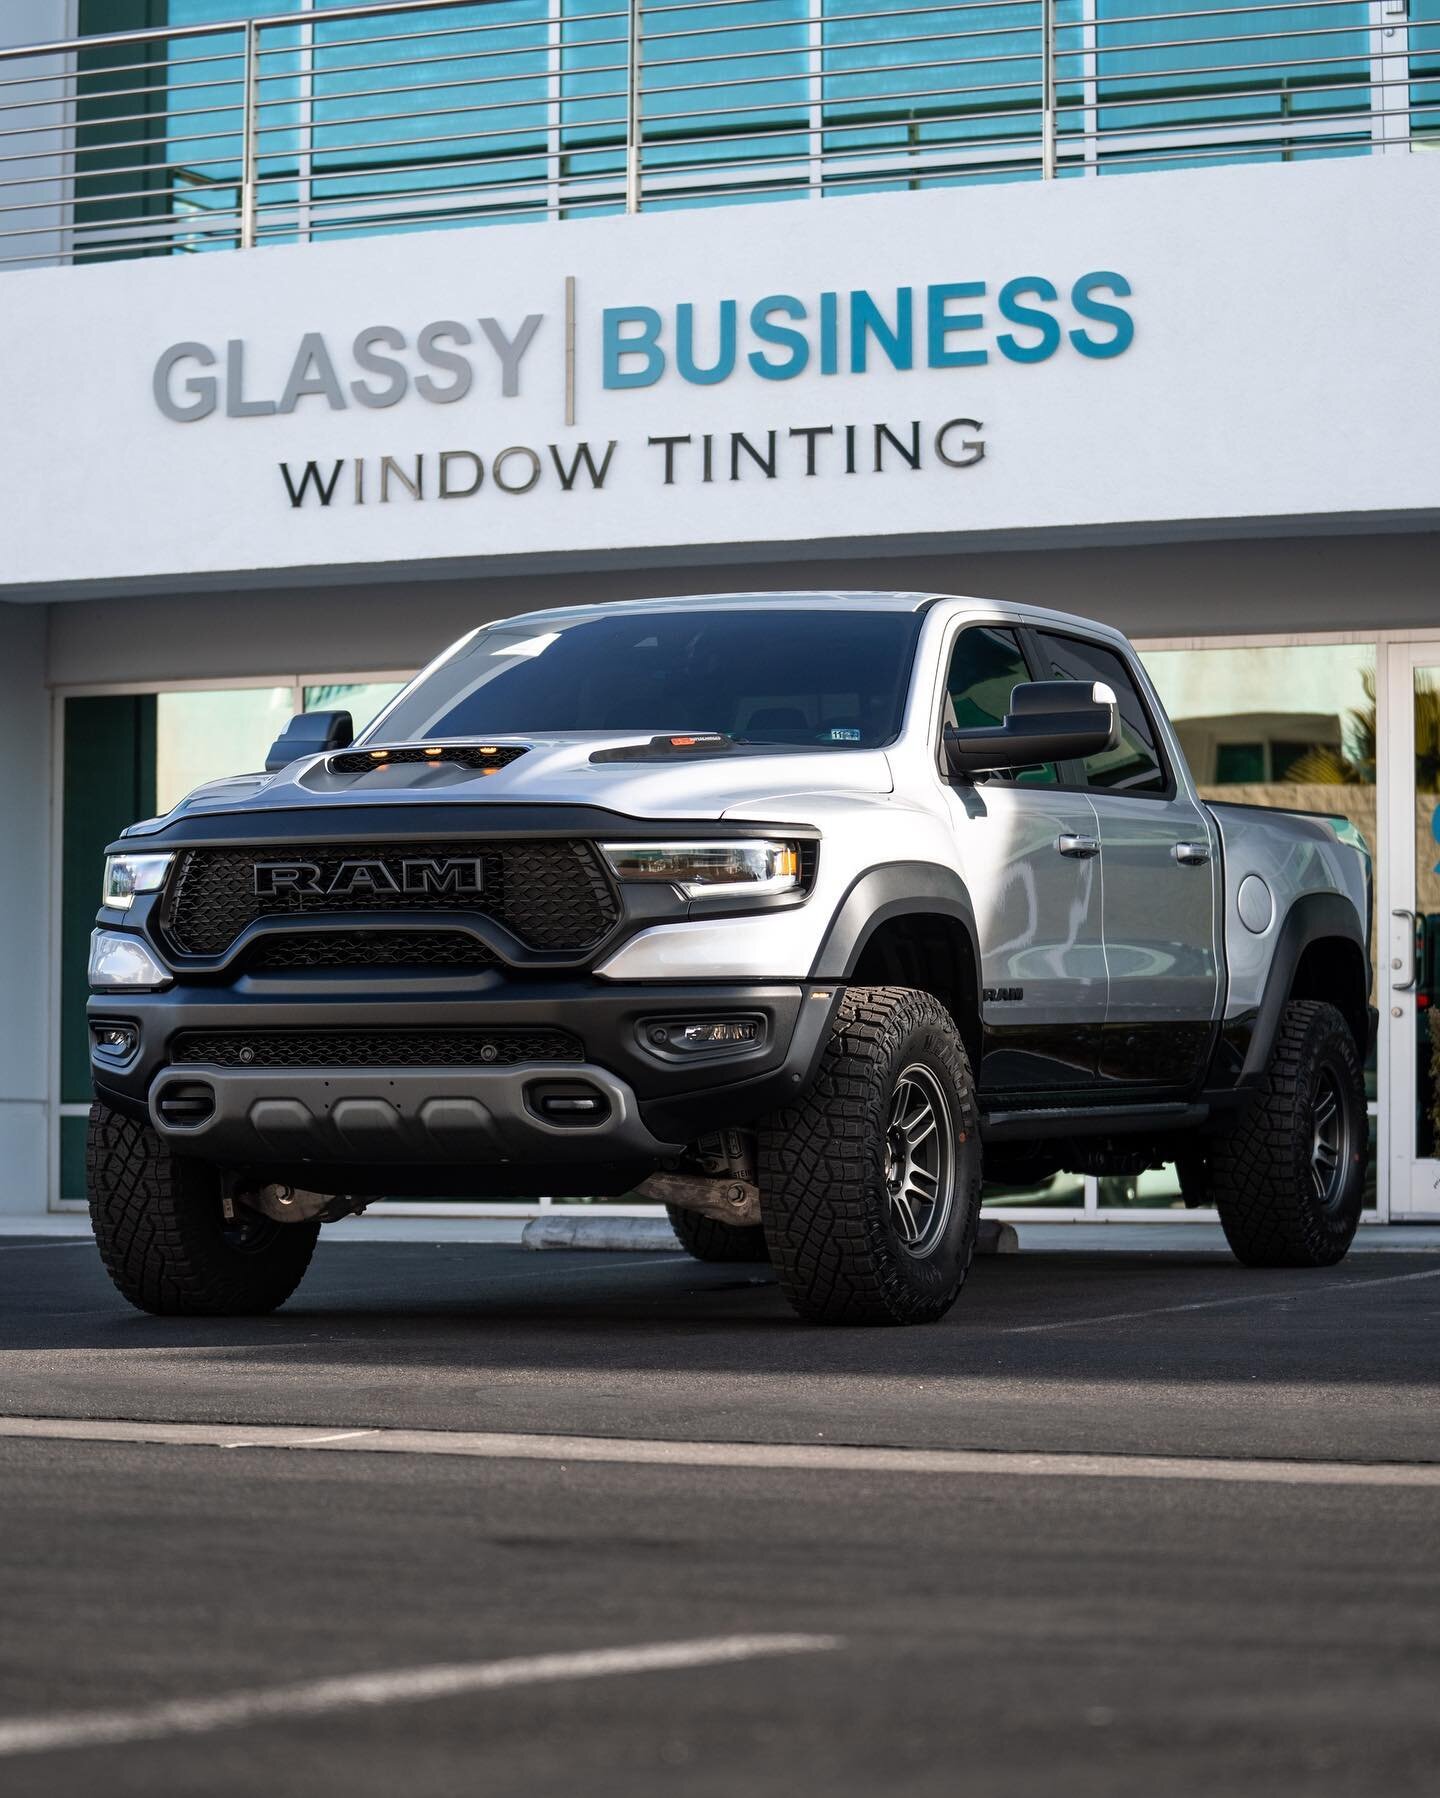 Tinted the windows on this mean TRX - swipe till the end to see the difference 🔥⁠

This truck received a full front end in @xpel Fusion PPF as well as a polish and @xpel Fusion + ceramic coating on all of the paint, plastics, and wheels. 
⁠
DM us to